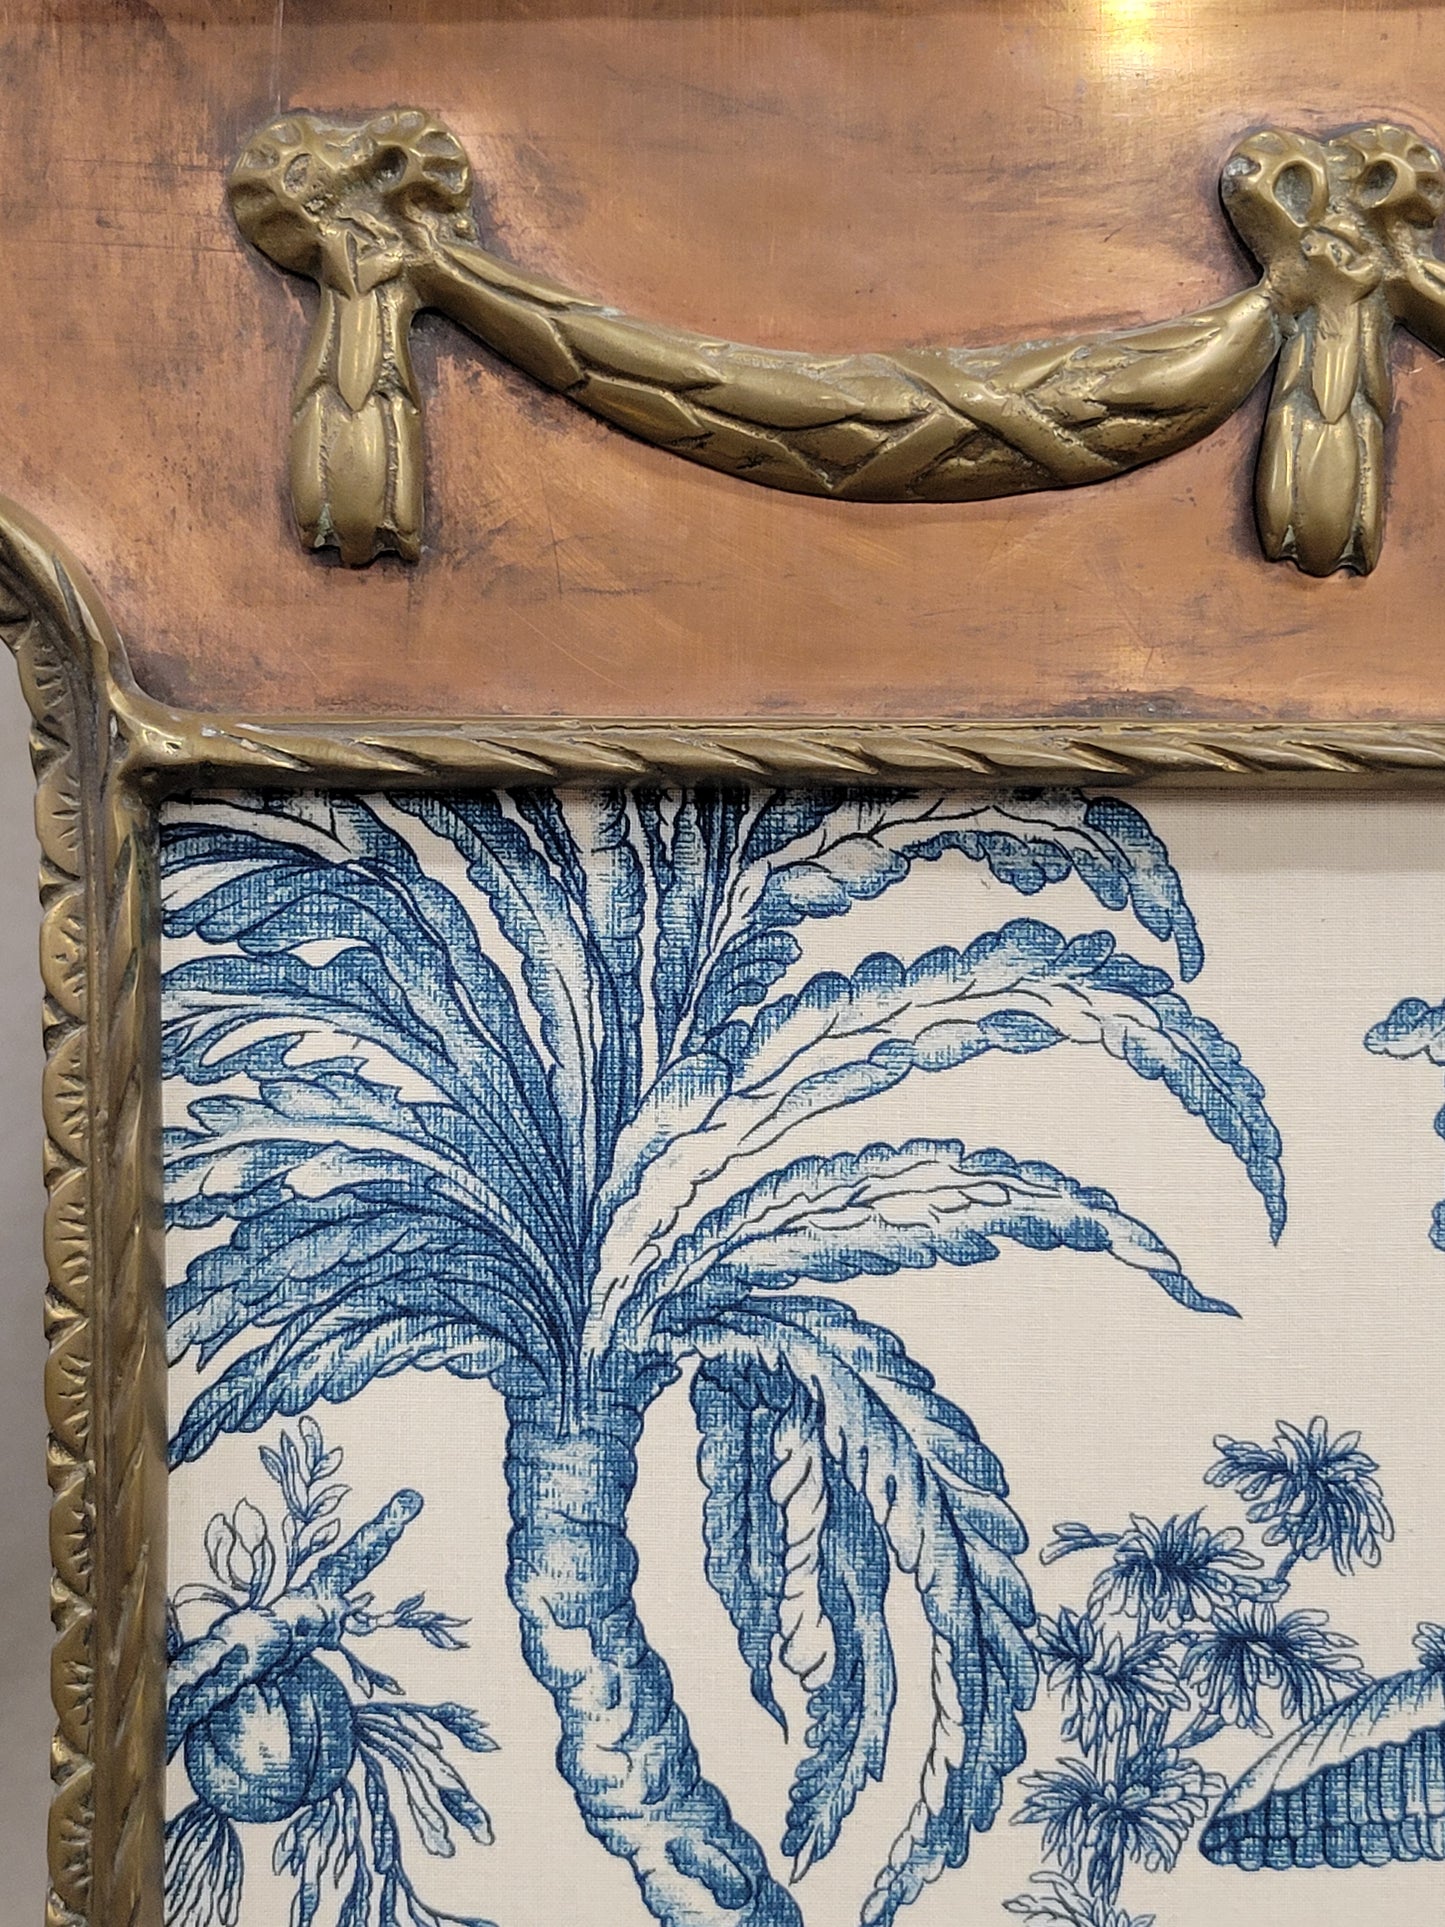 Antique 1920s Copper and Brass Firescreen With Schumacher Blue and White Asian Toile Inset